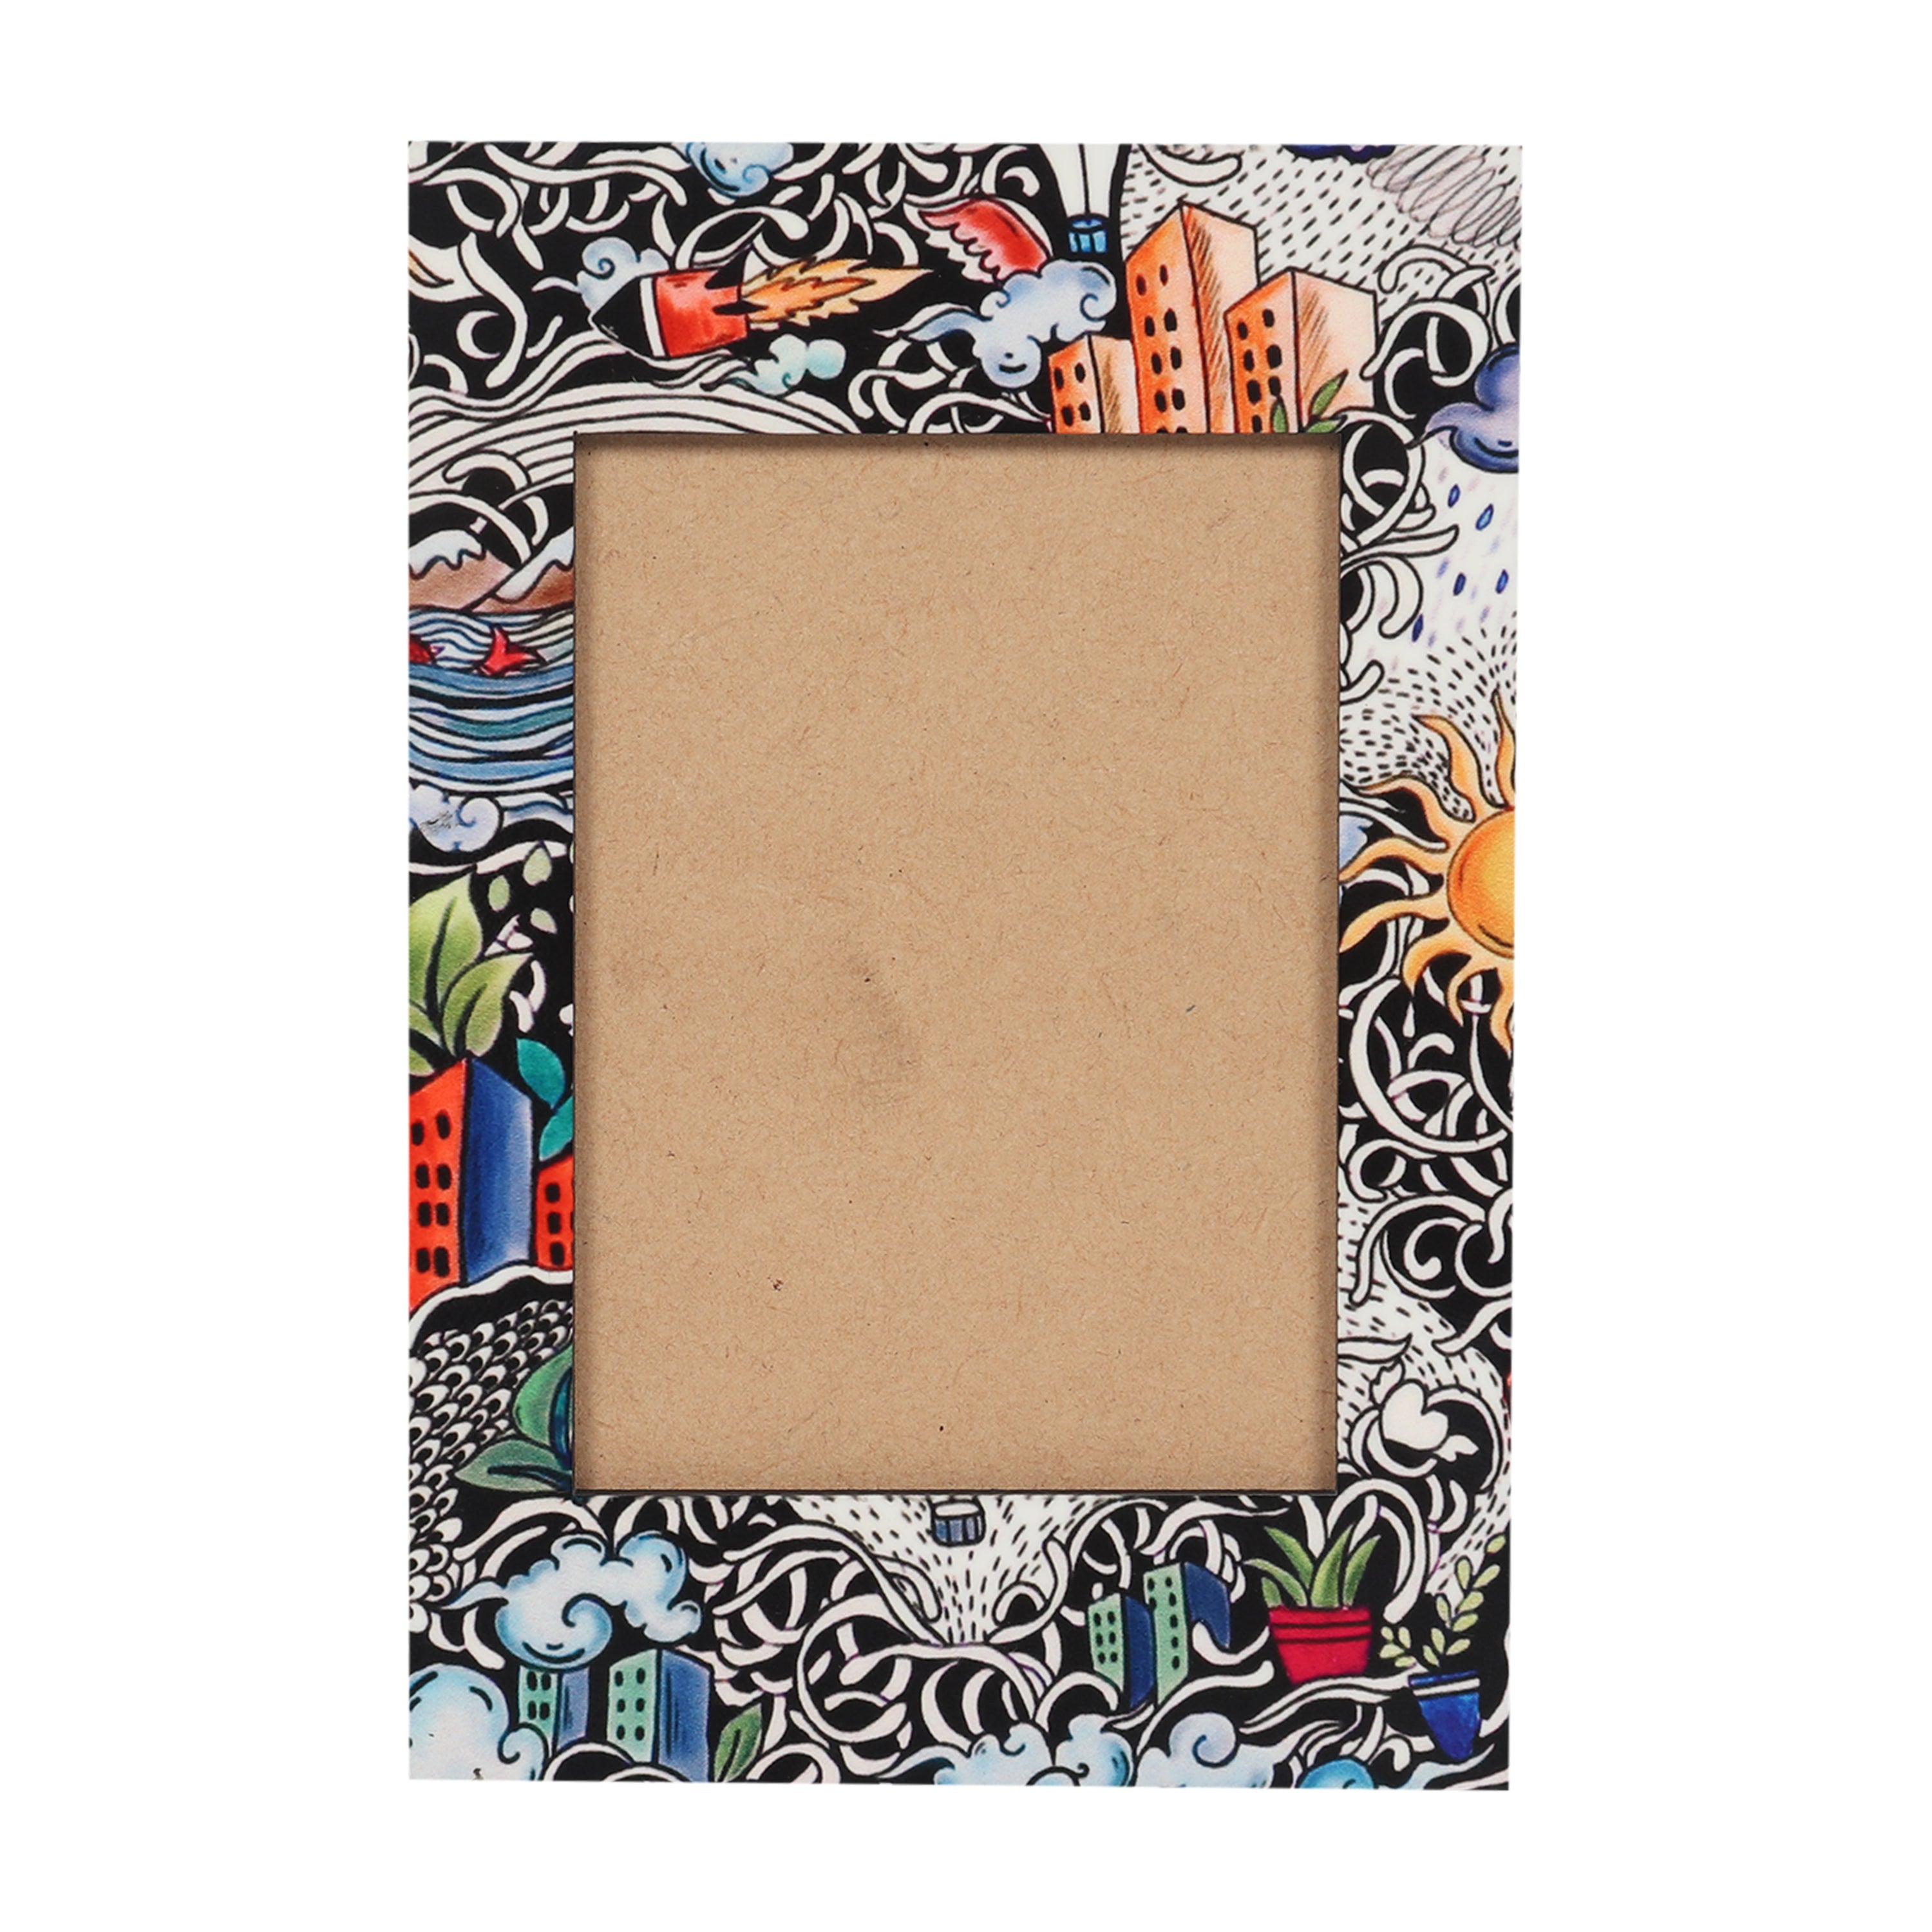 Magnetic Photo Frame - City Life Doodle